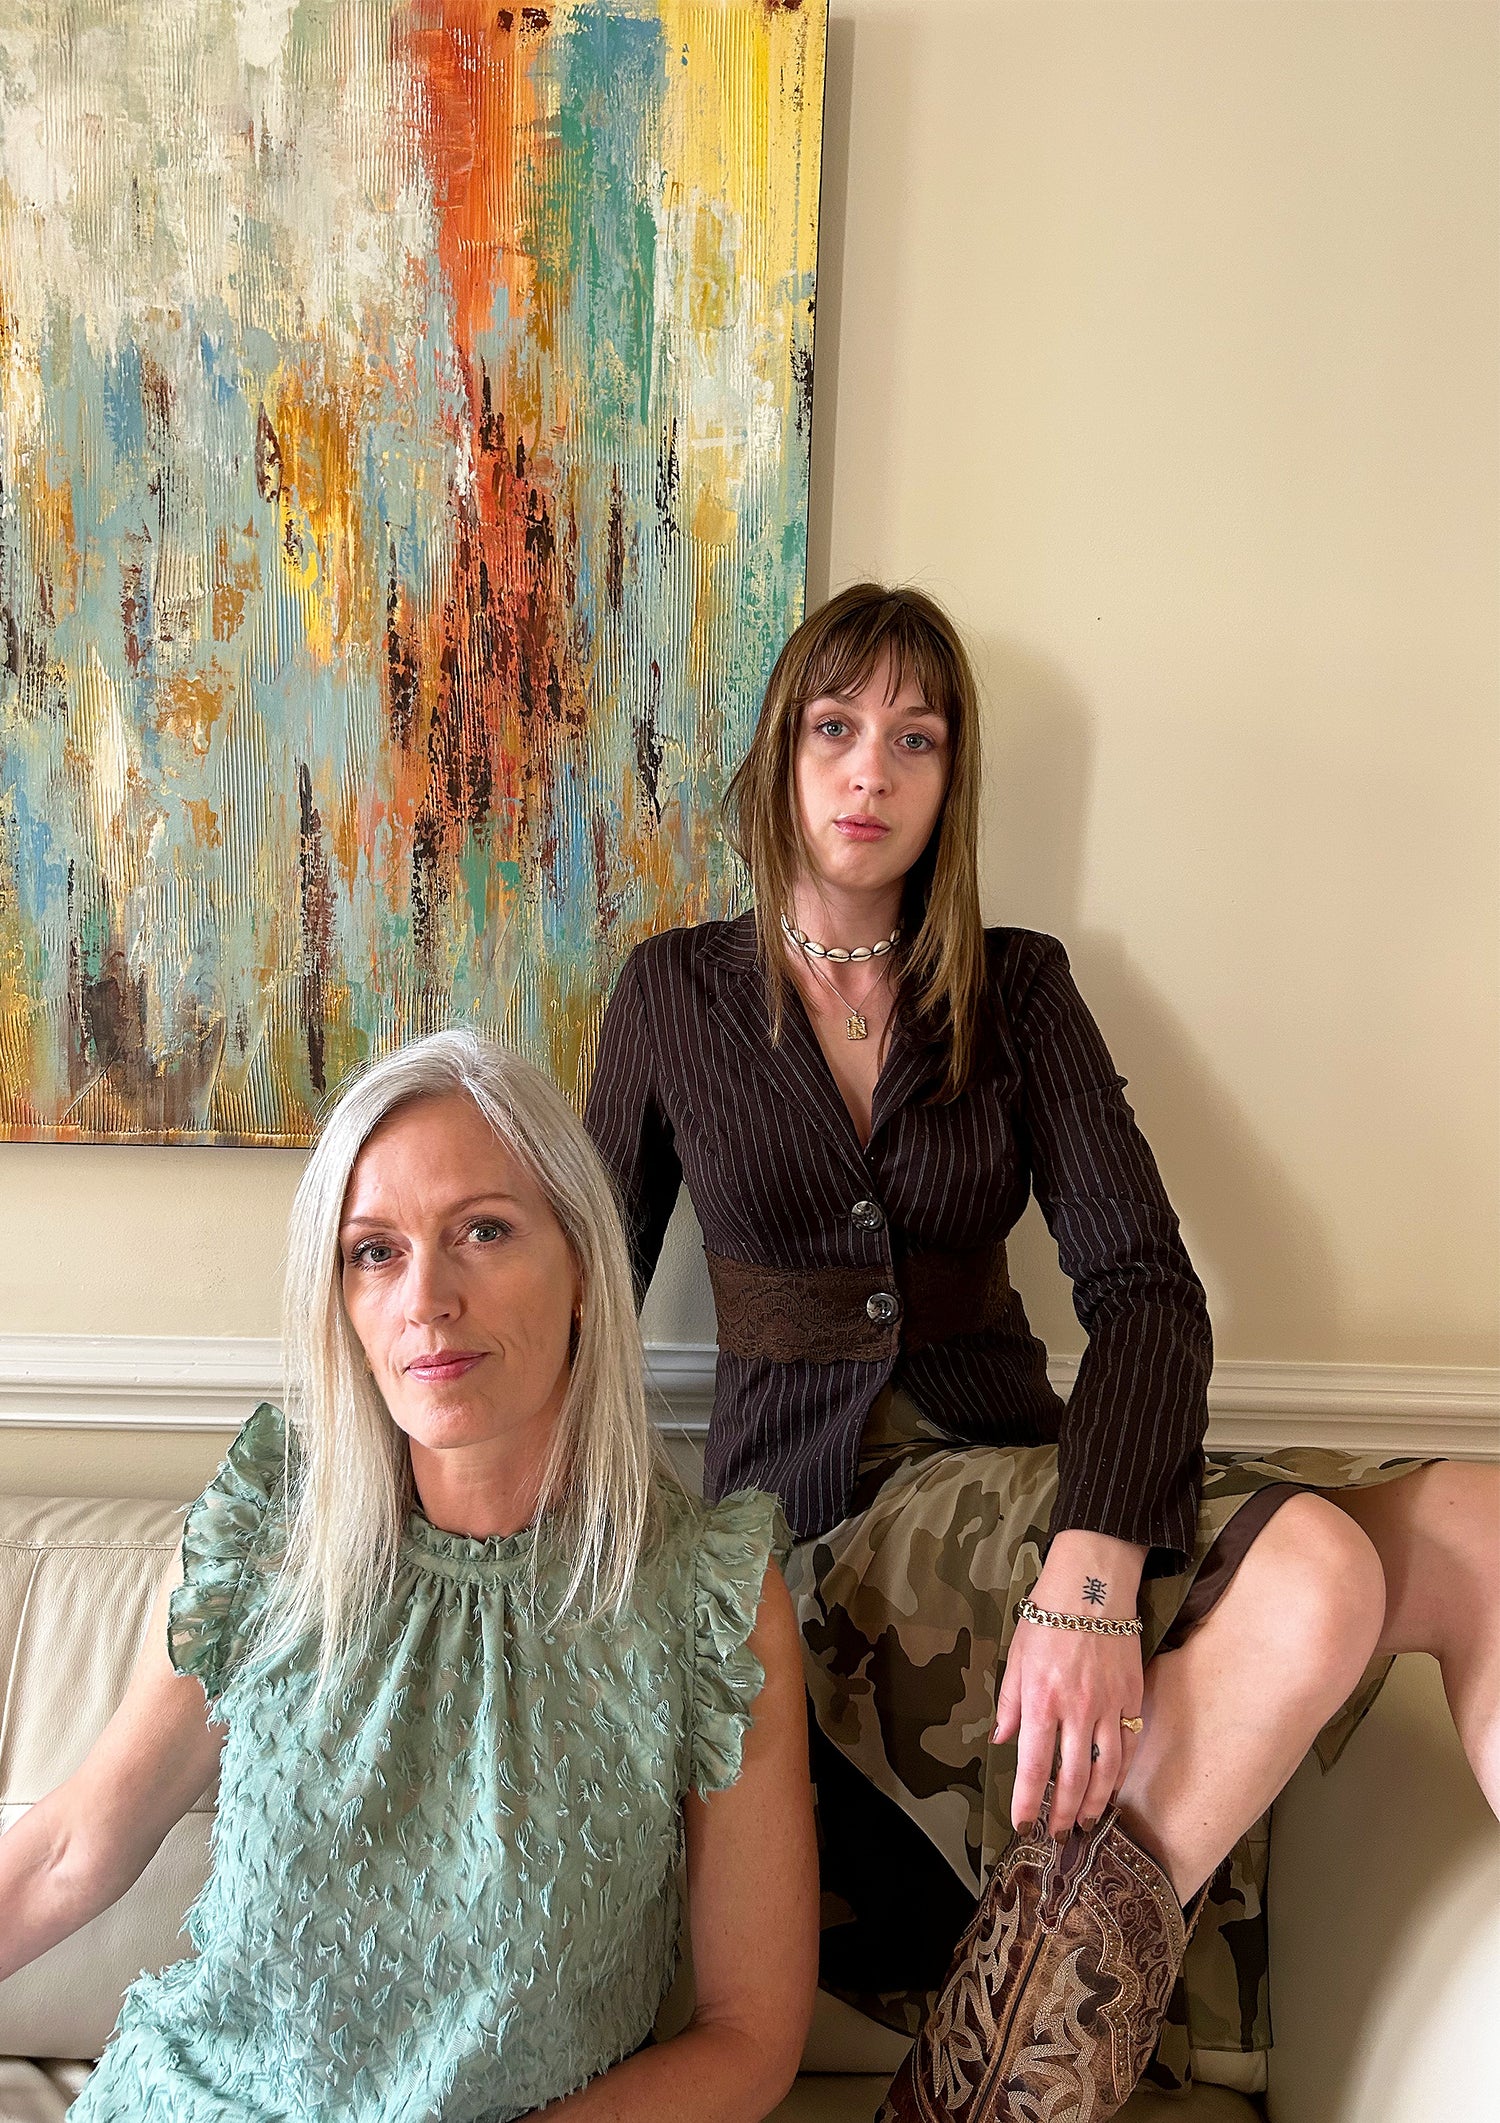 Conscious Collab was founded in 2023 by mother - daughter team Maud and Helena